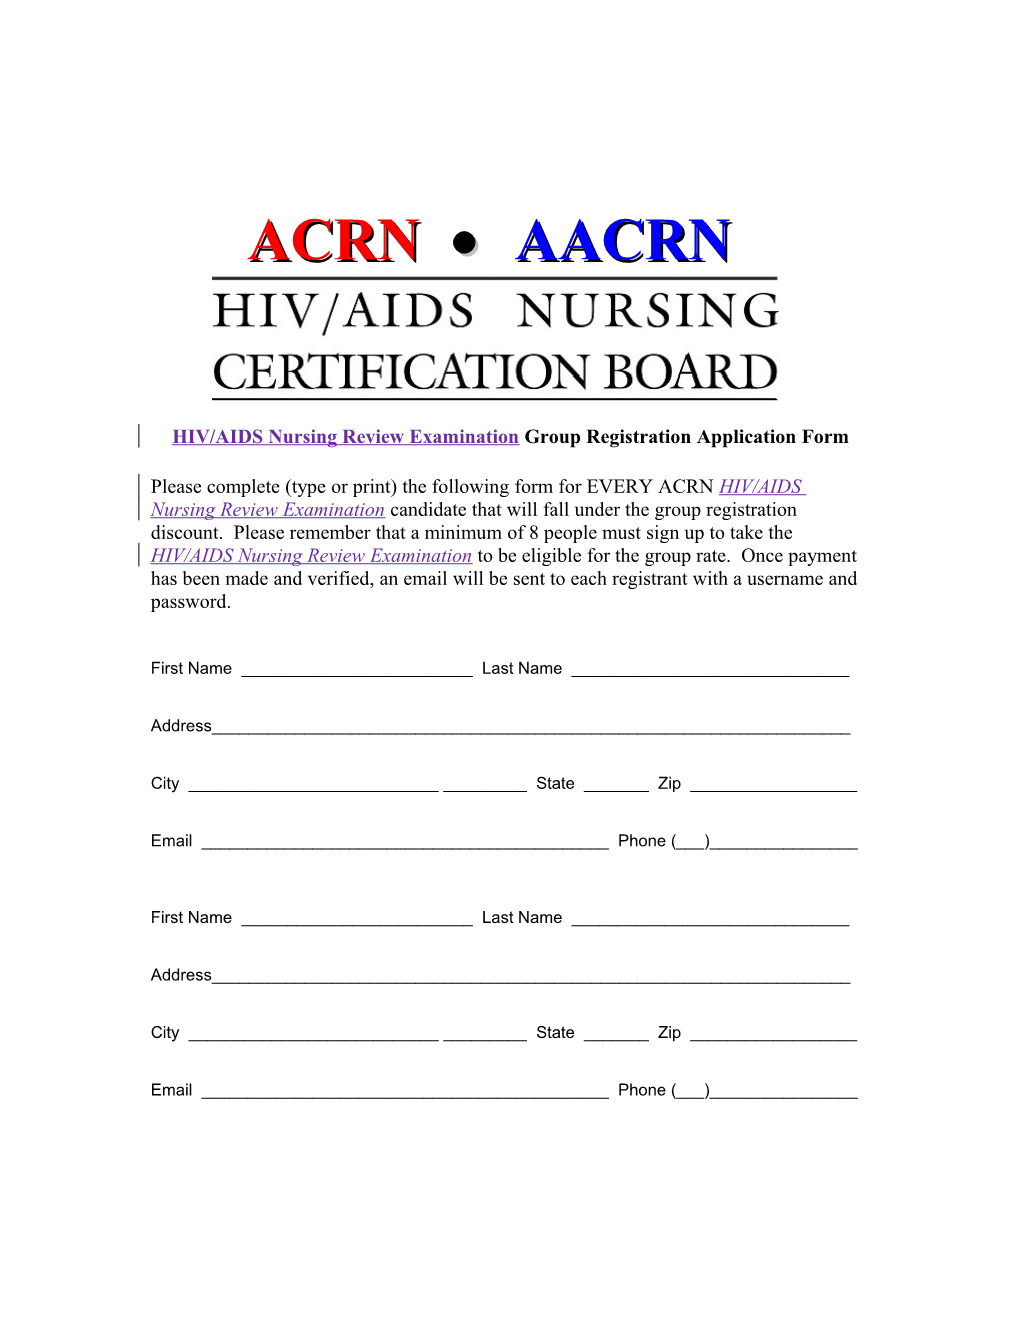 ACRN Practice Exam Group Registration Application Form